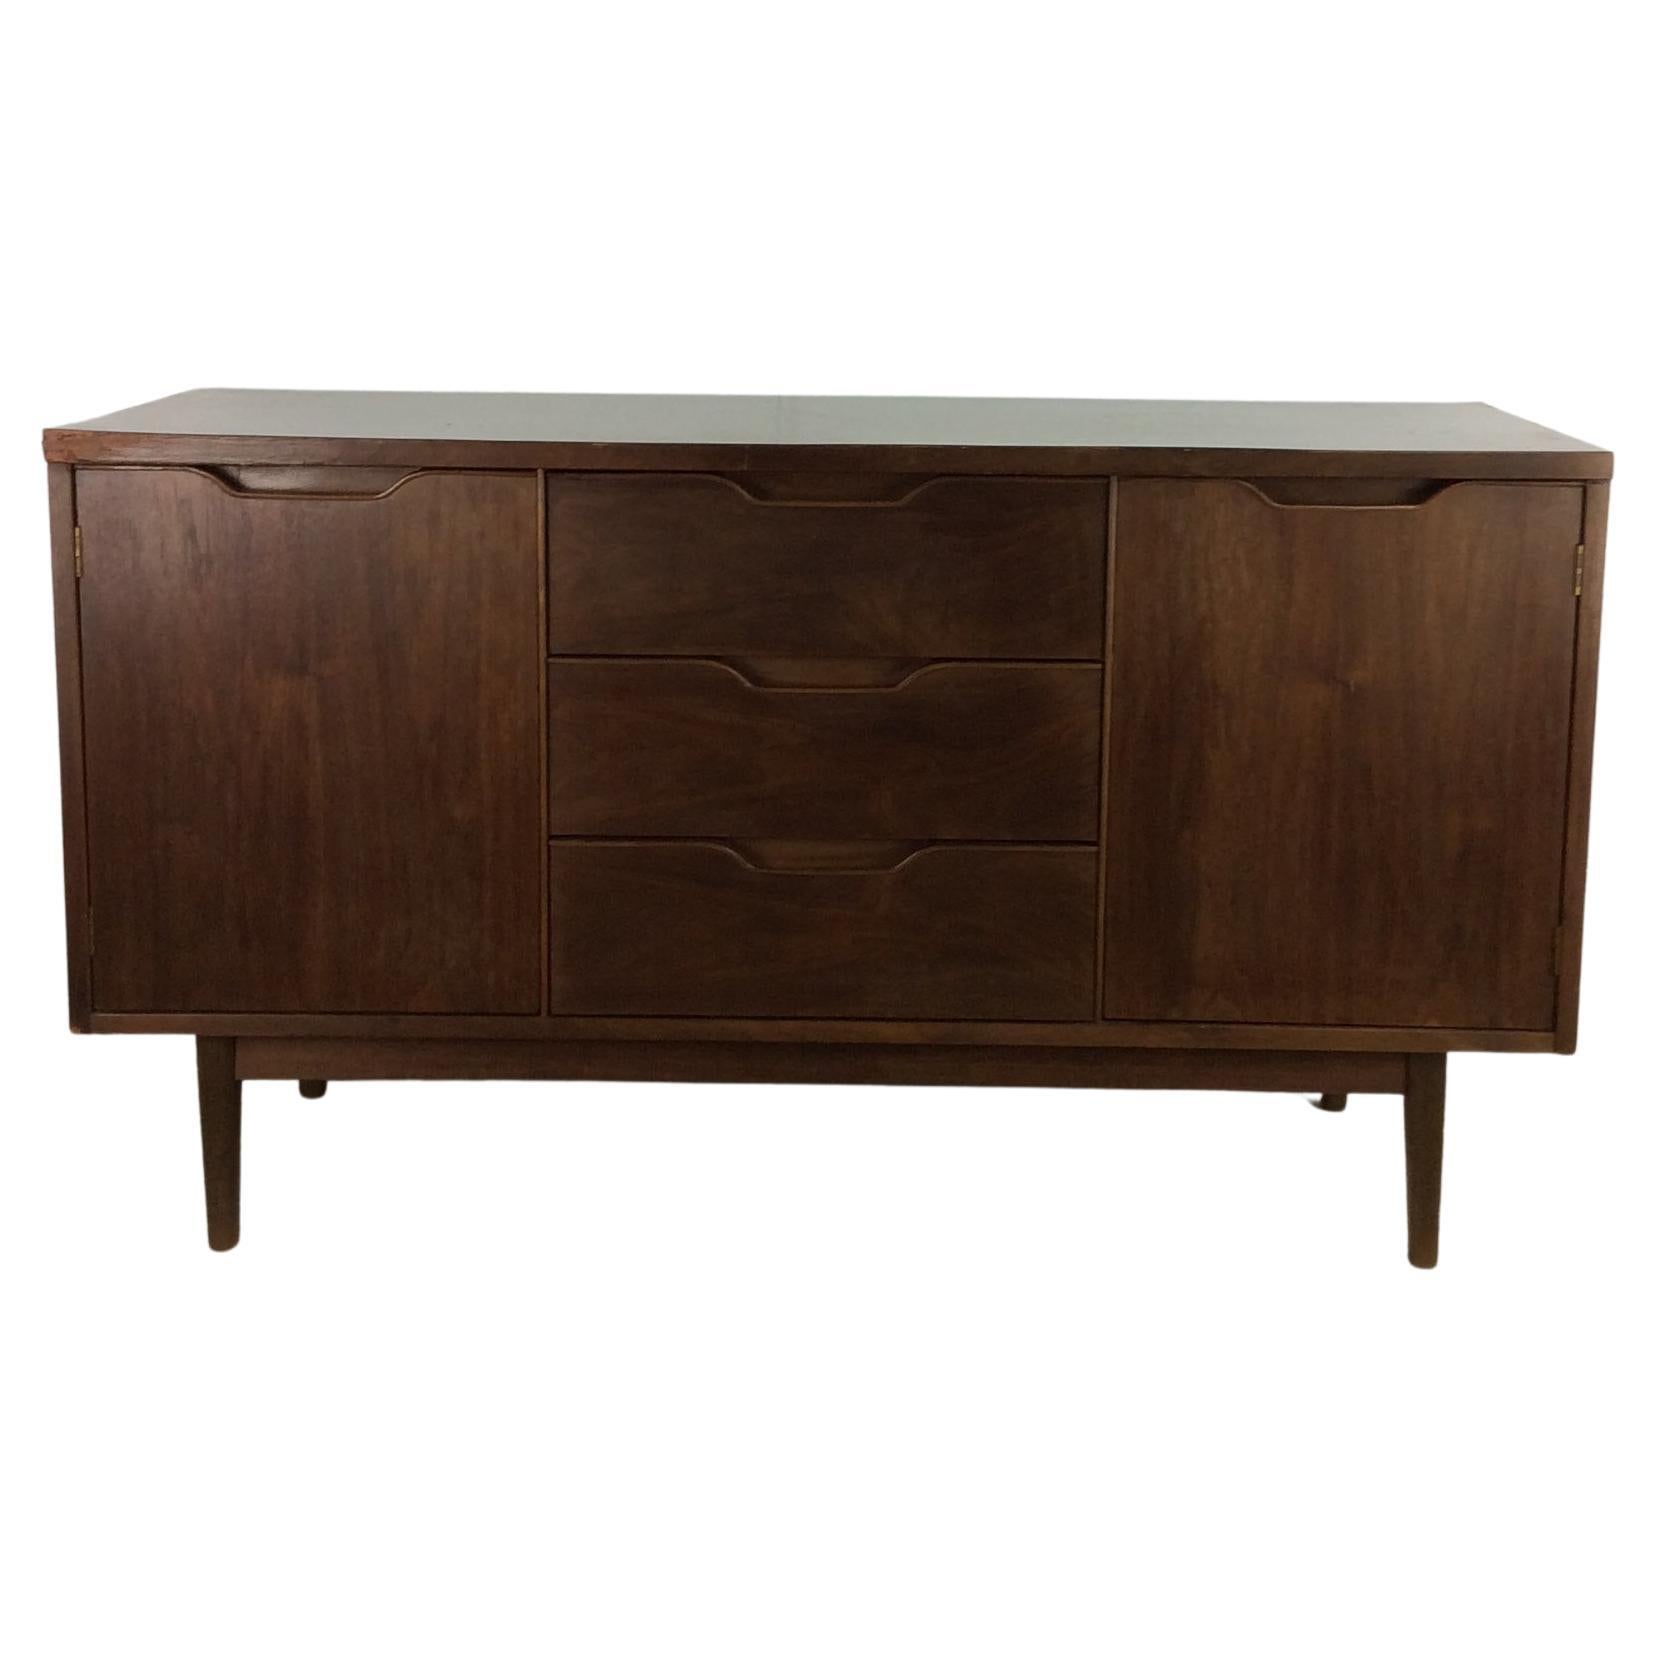 Mid-Century Modern Credenza by Stanley Furniture For Sale